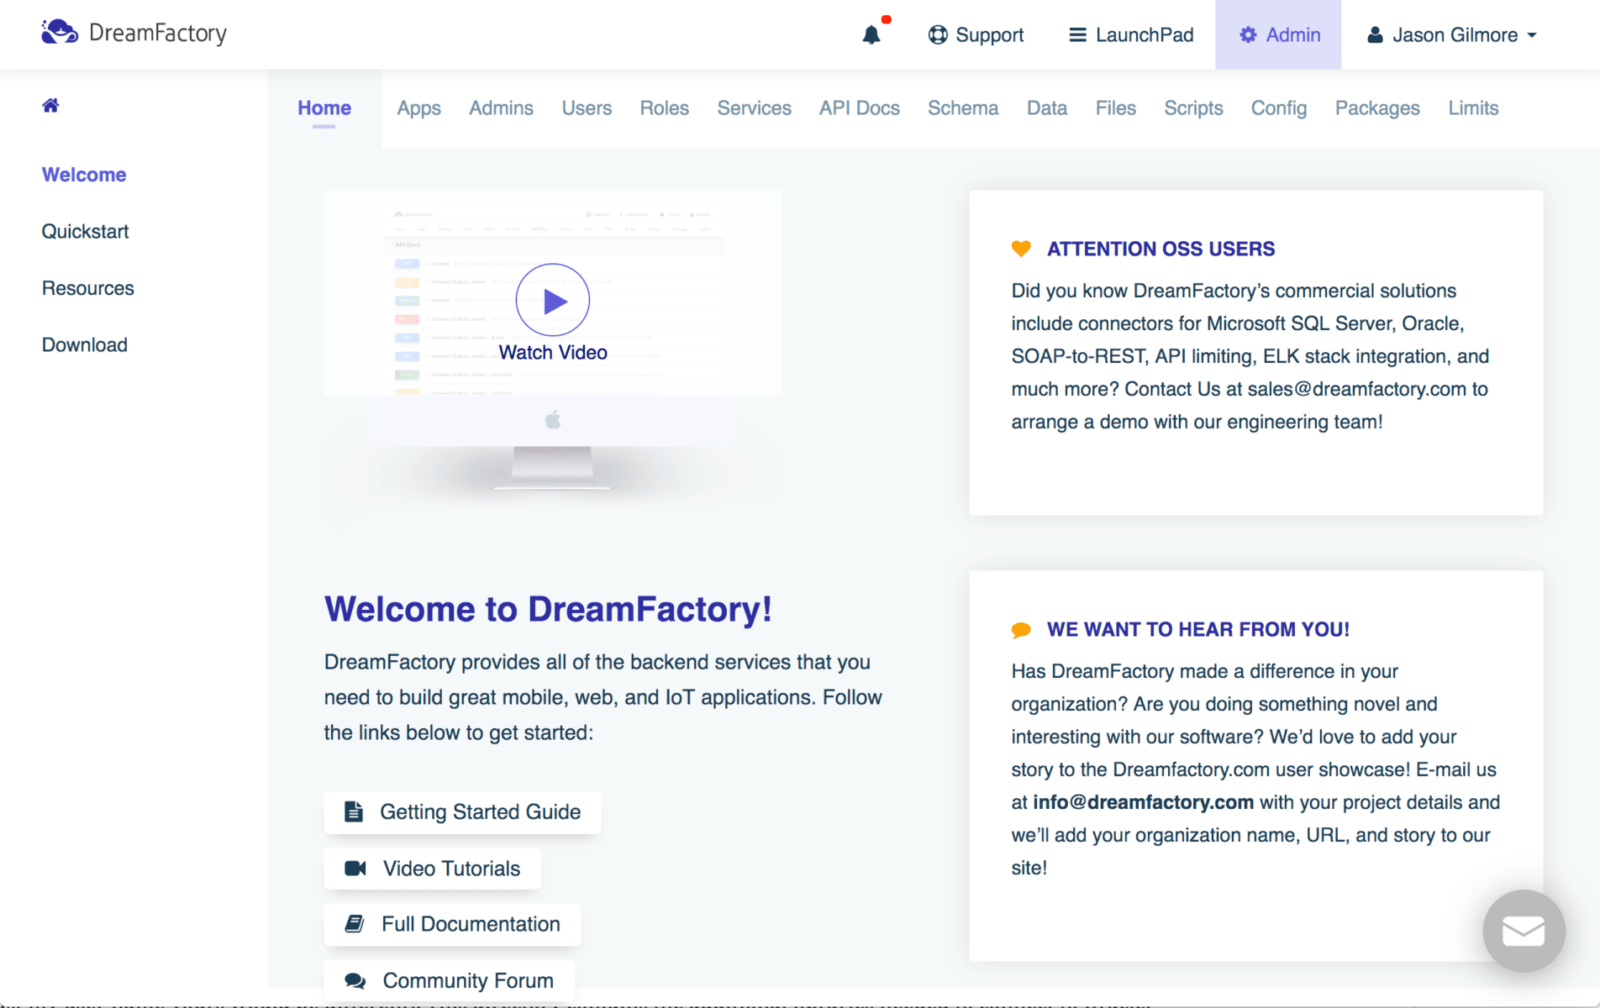 The DreamFactory Administration Console